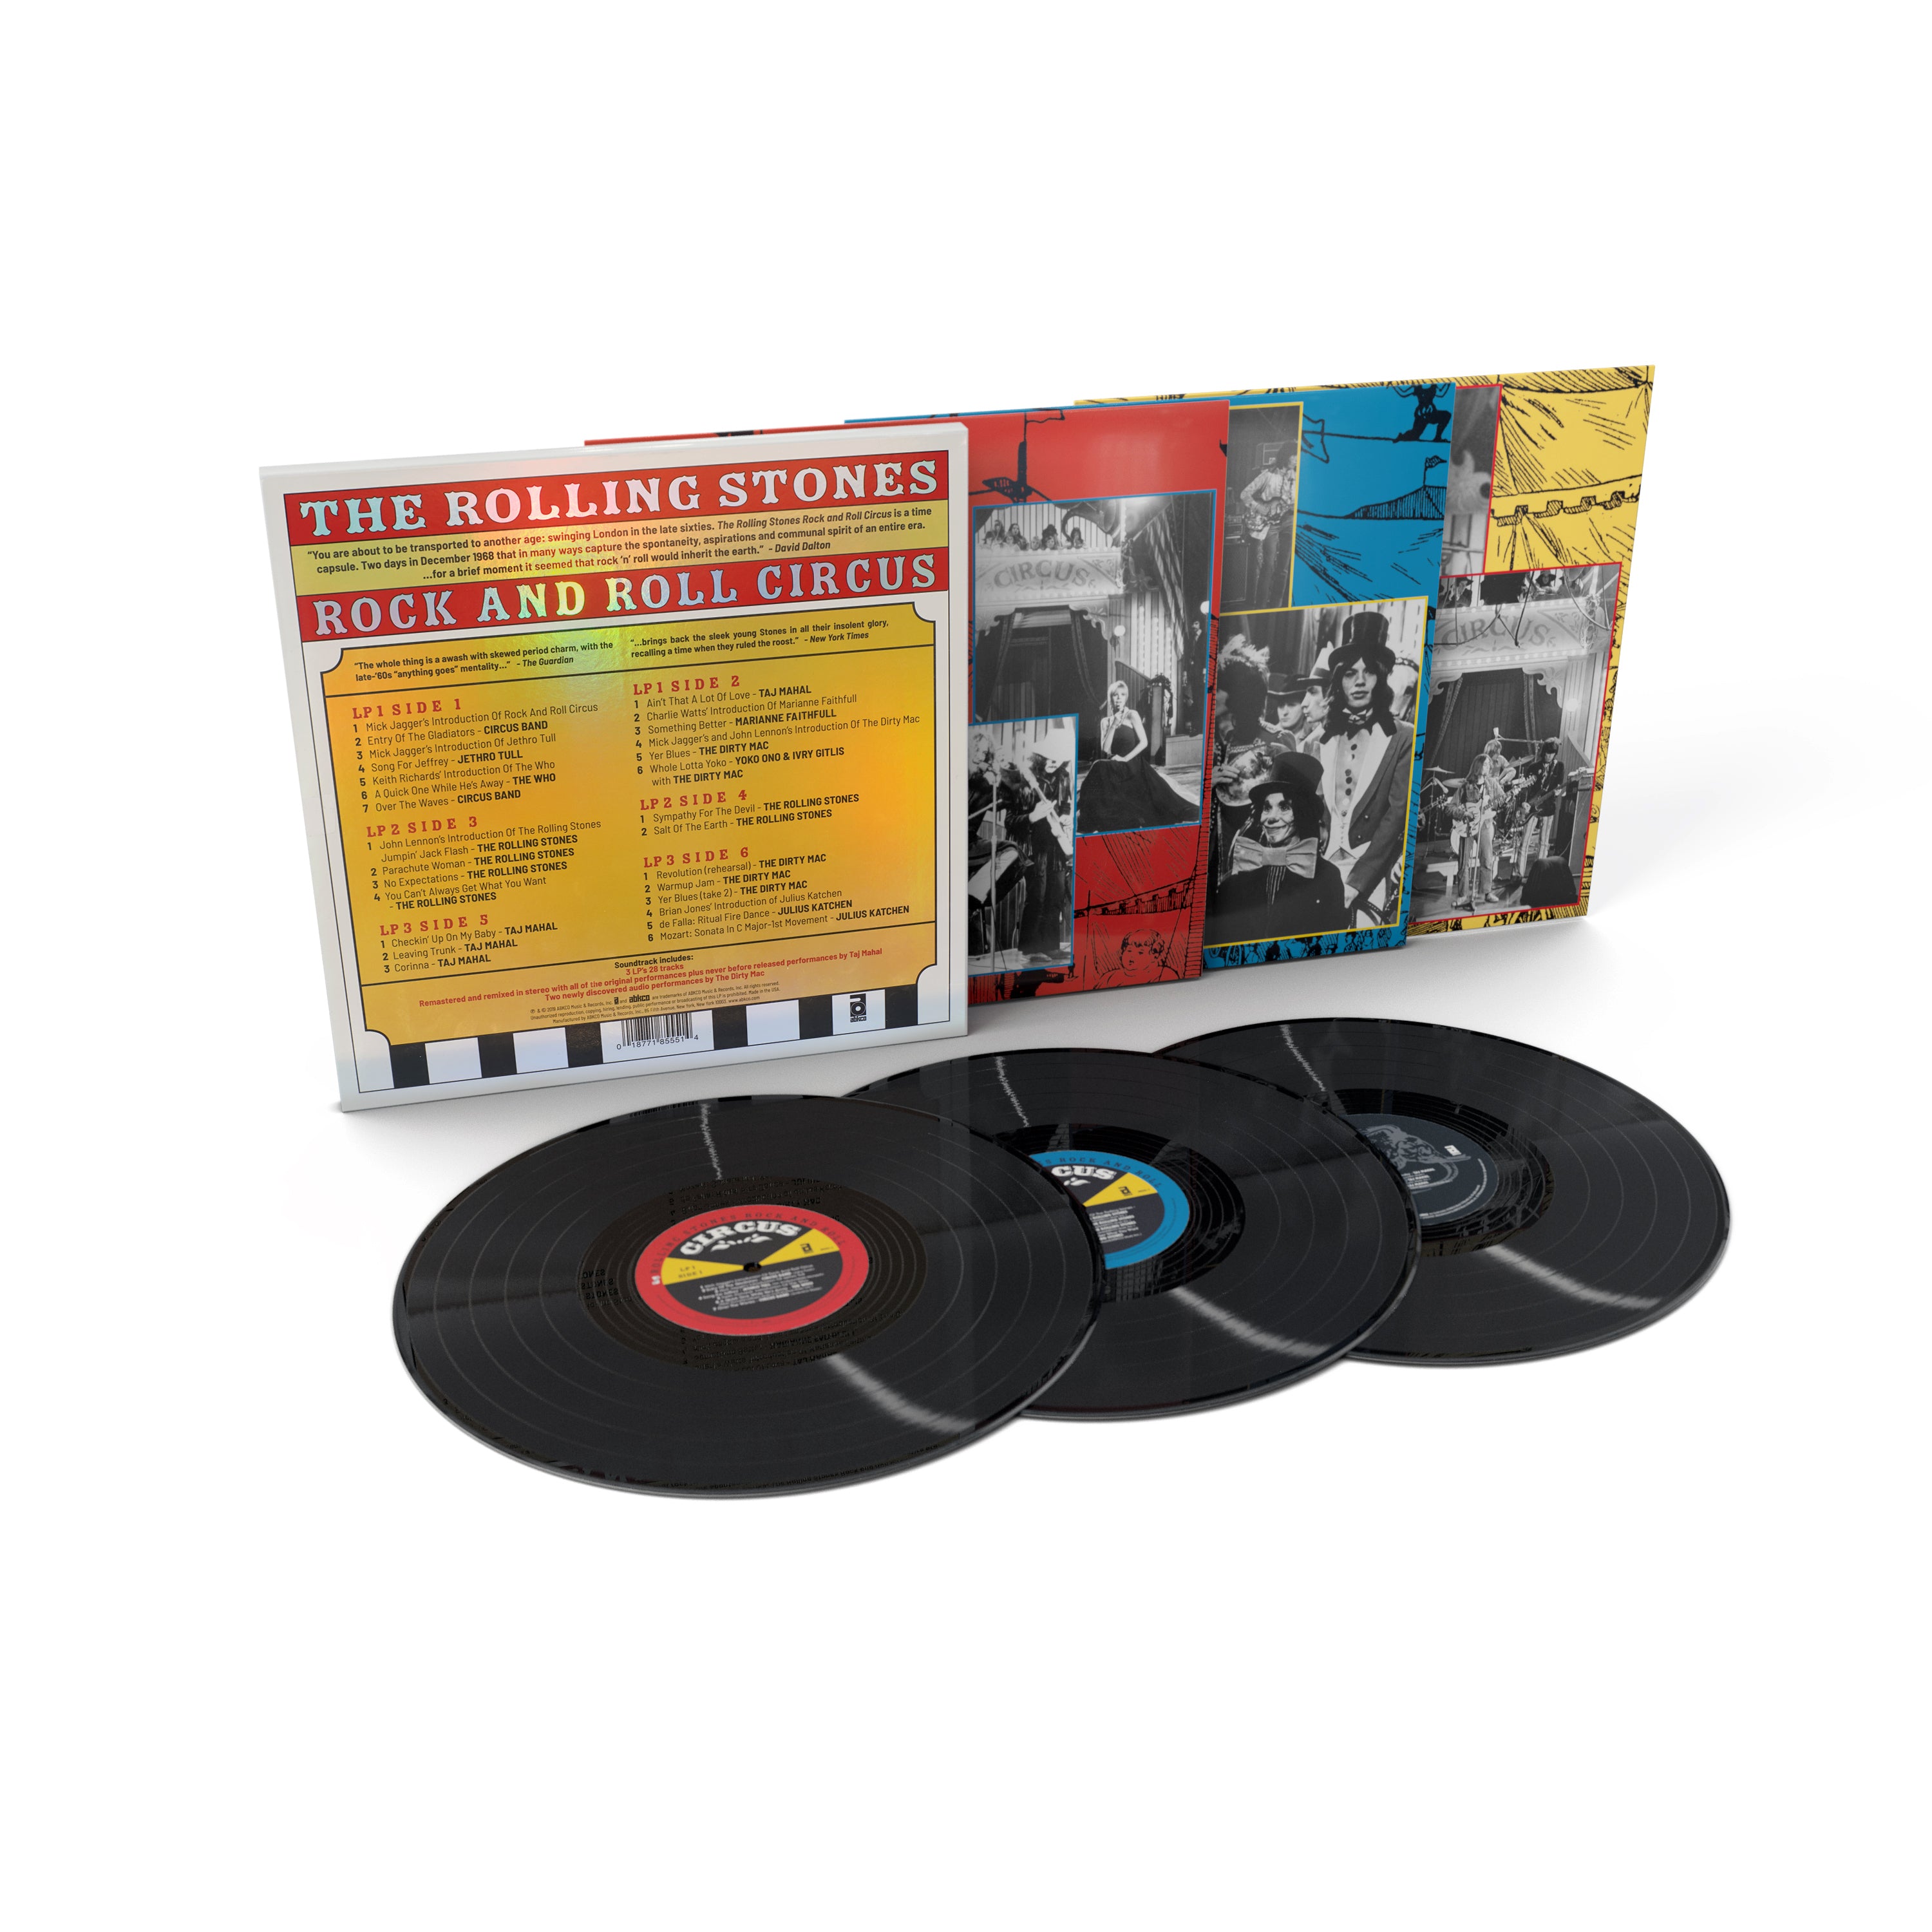 The Rolling Stones Rock and Roll Circus Vinyl - ABKCO Music and Records  Official Store